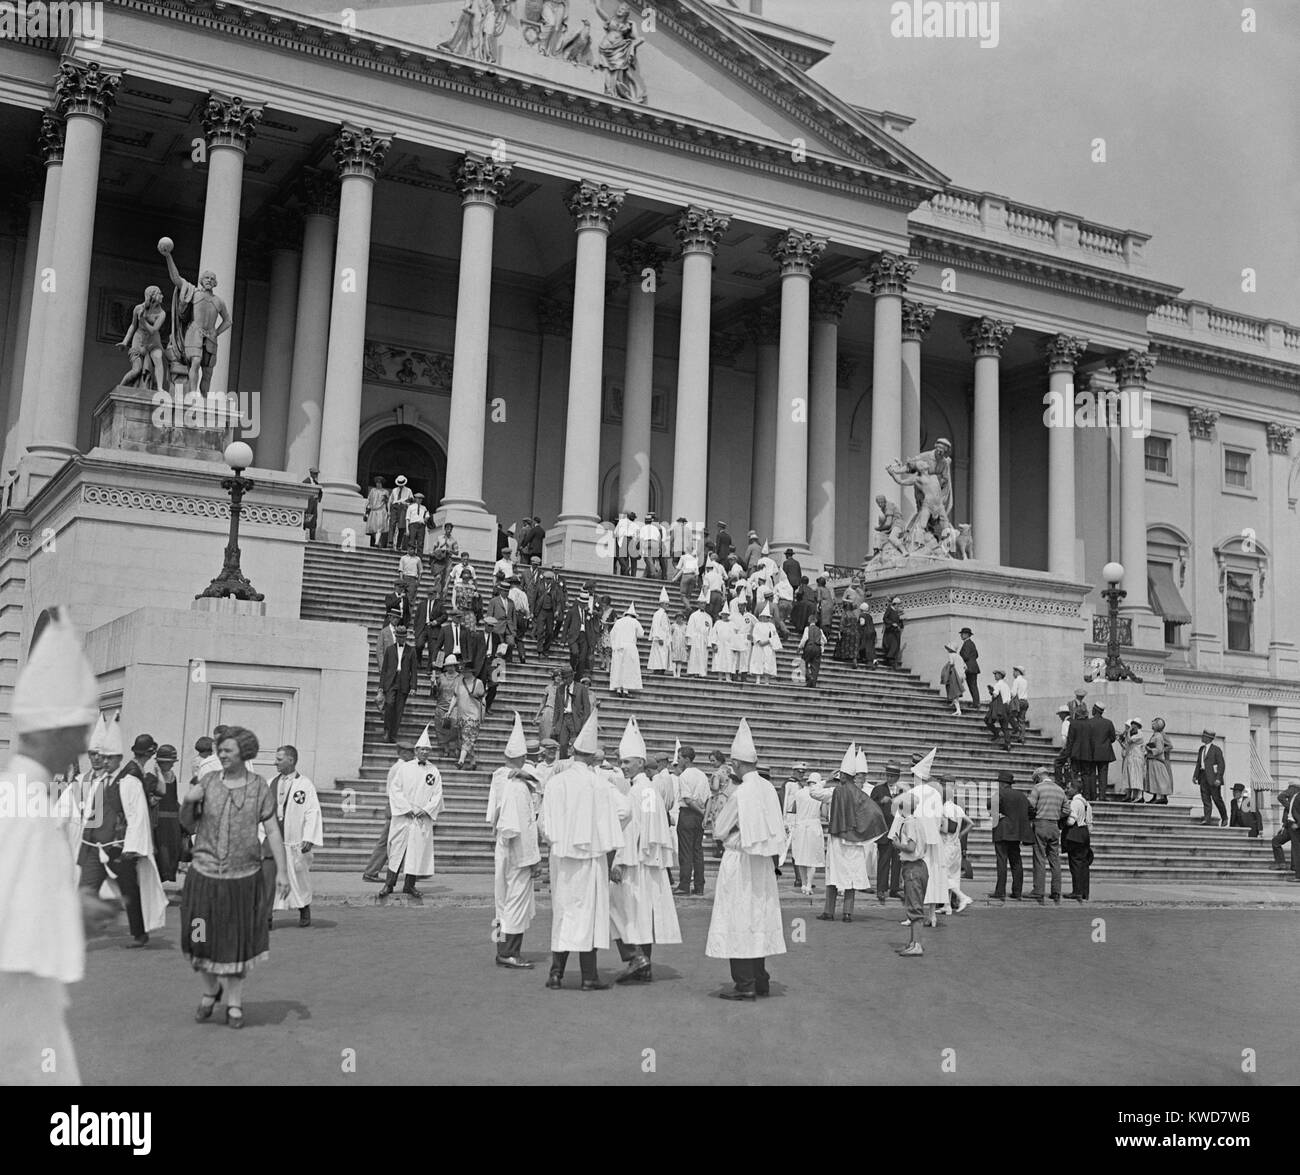 Ku Klux Klansmen visiting the U.S. Capitol during their mass gathering in Washington, D.C. August 8, 1925. They are unmasked but wear their robes and pointed hats. (BSLOC 2015 16 179) Stock Photo